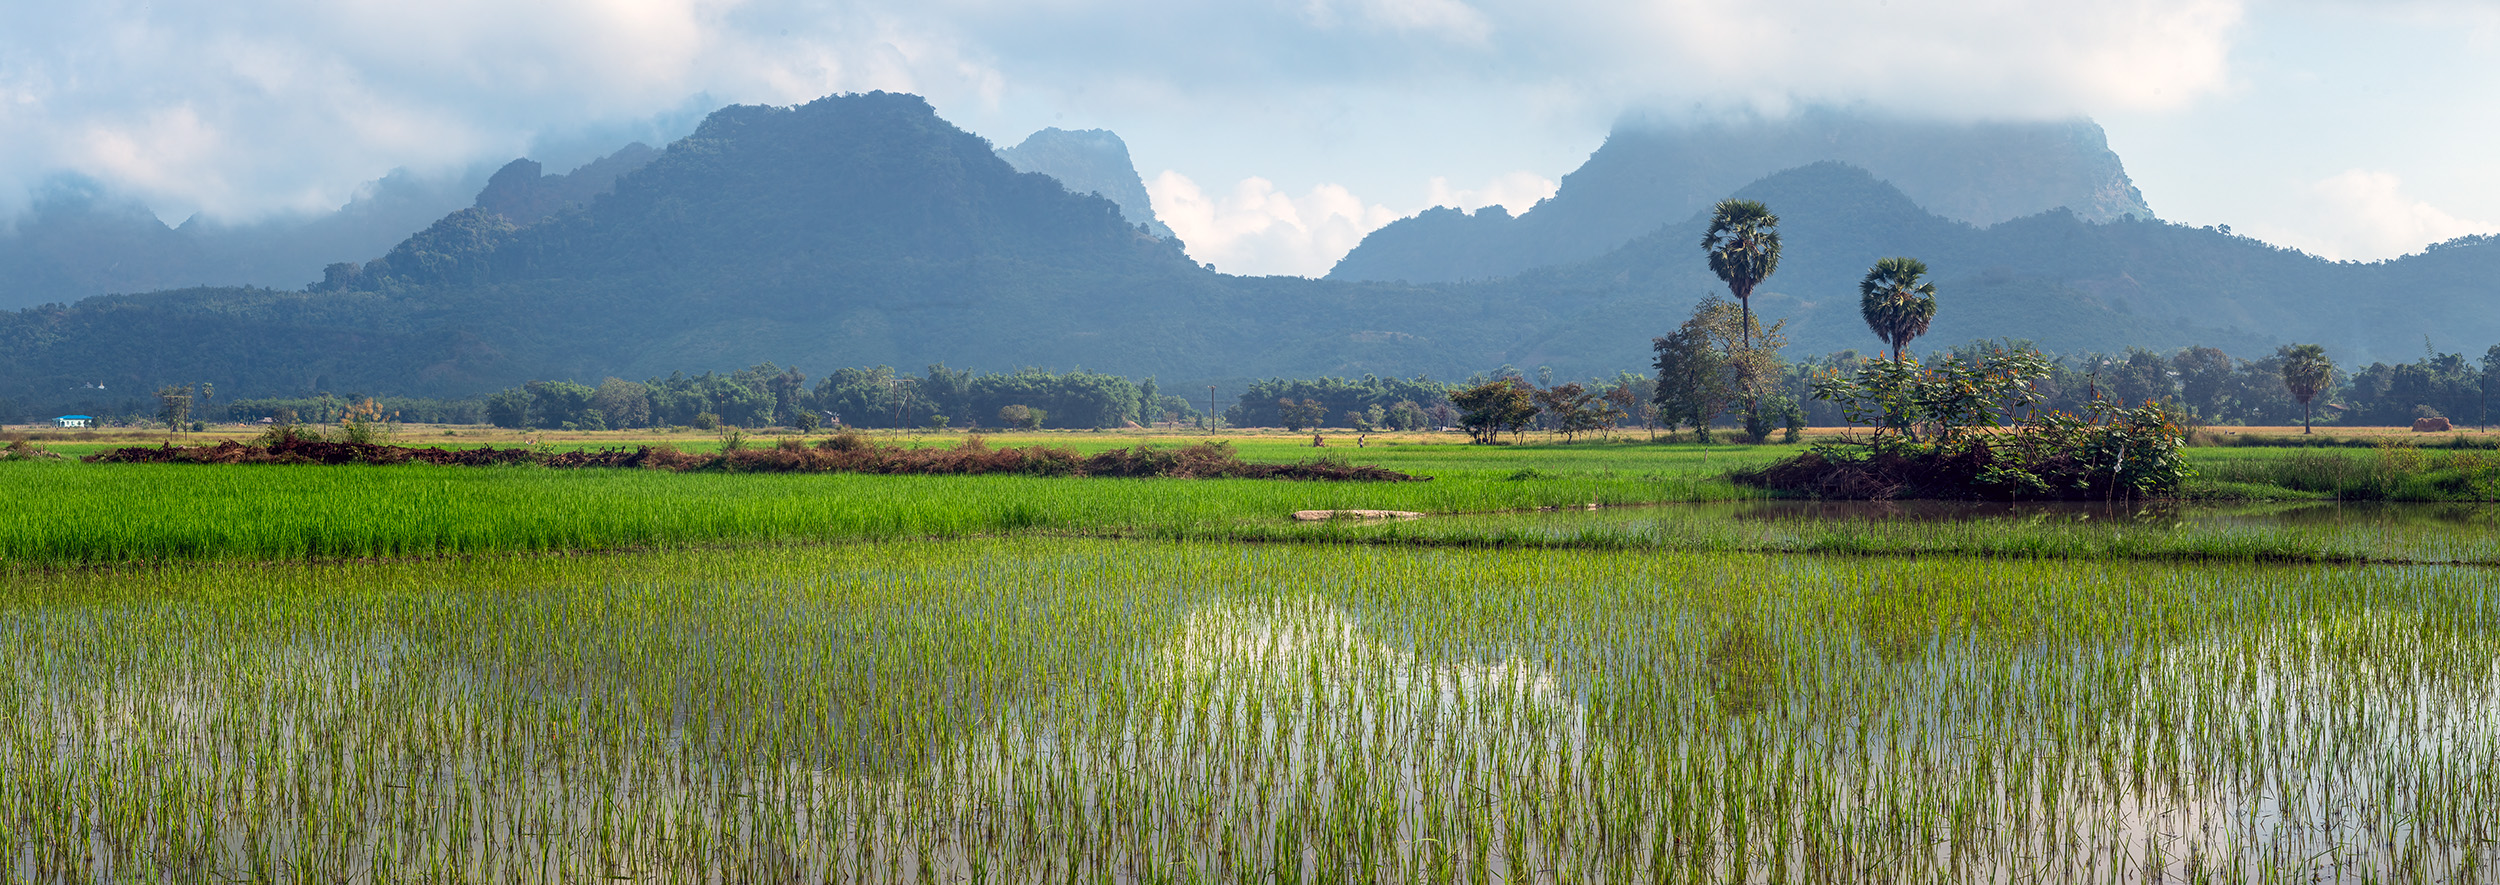 "Myanmar's Rural Tapestry" unveils the picturesque beauty of the countryside. In this panoramic scene, lush rice paddies stretch...